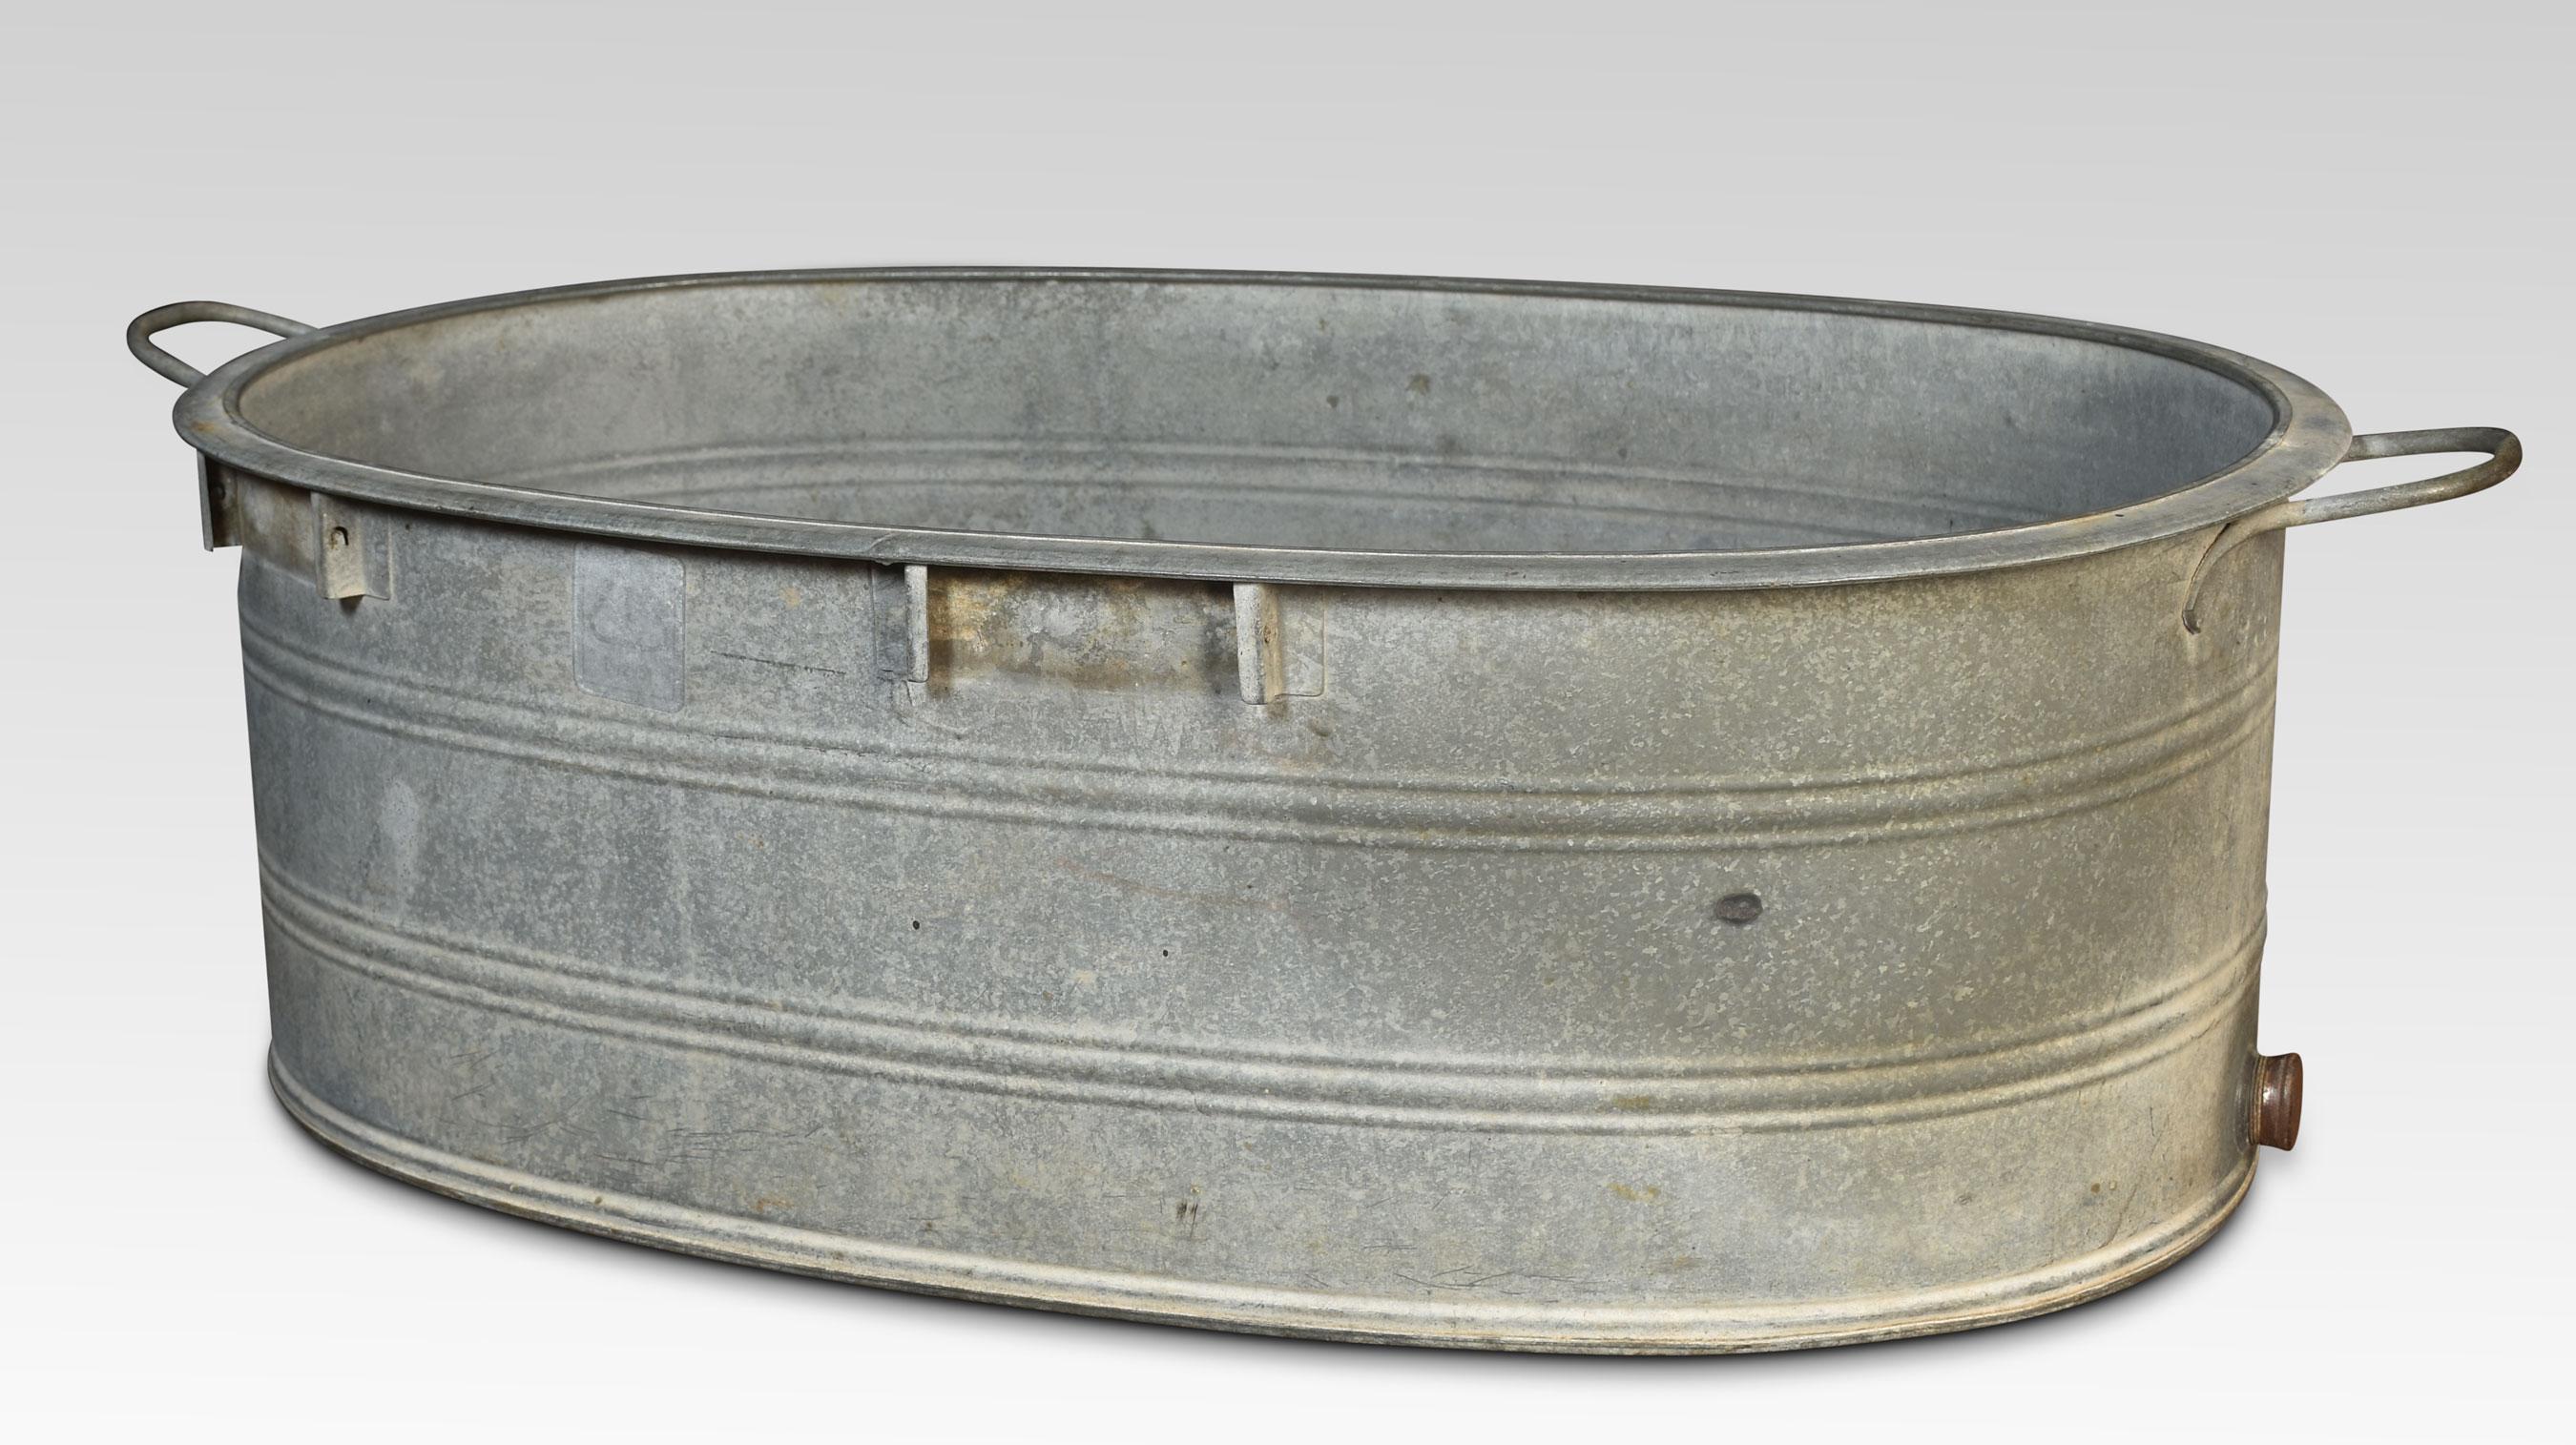 Galvanised tin bath, of oval form fitted with carrying handles and original brass bung.
Dimensions
Height 12.5 Inches
Width 42 Inches
Depth 23.5 Inches